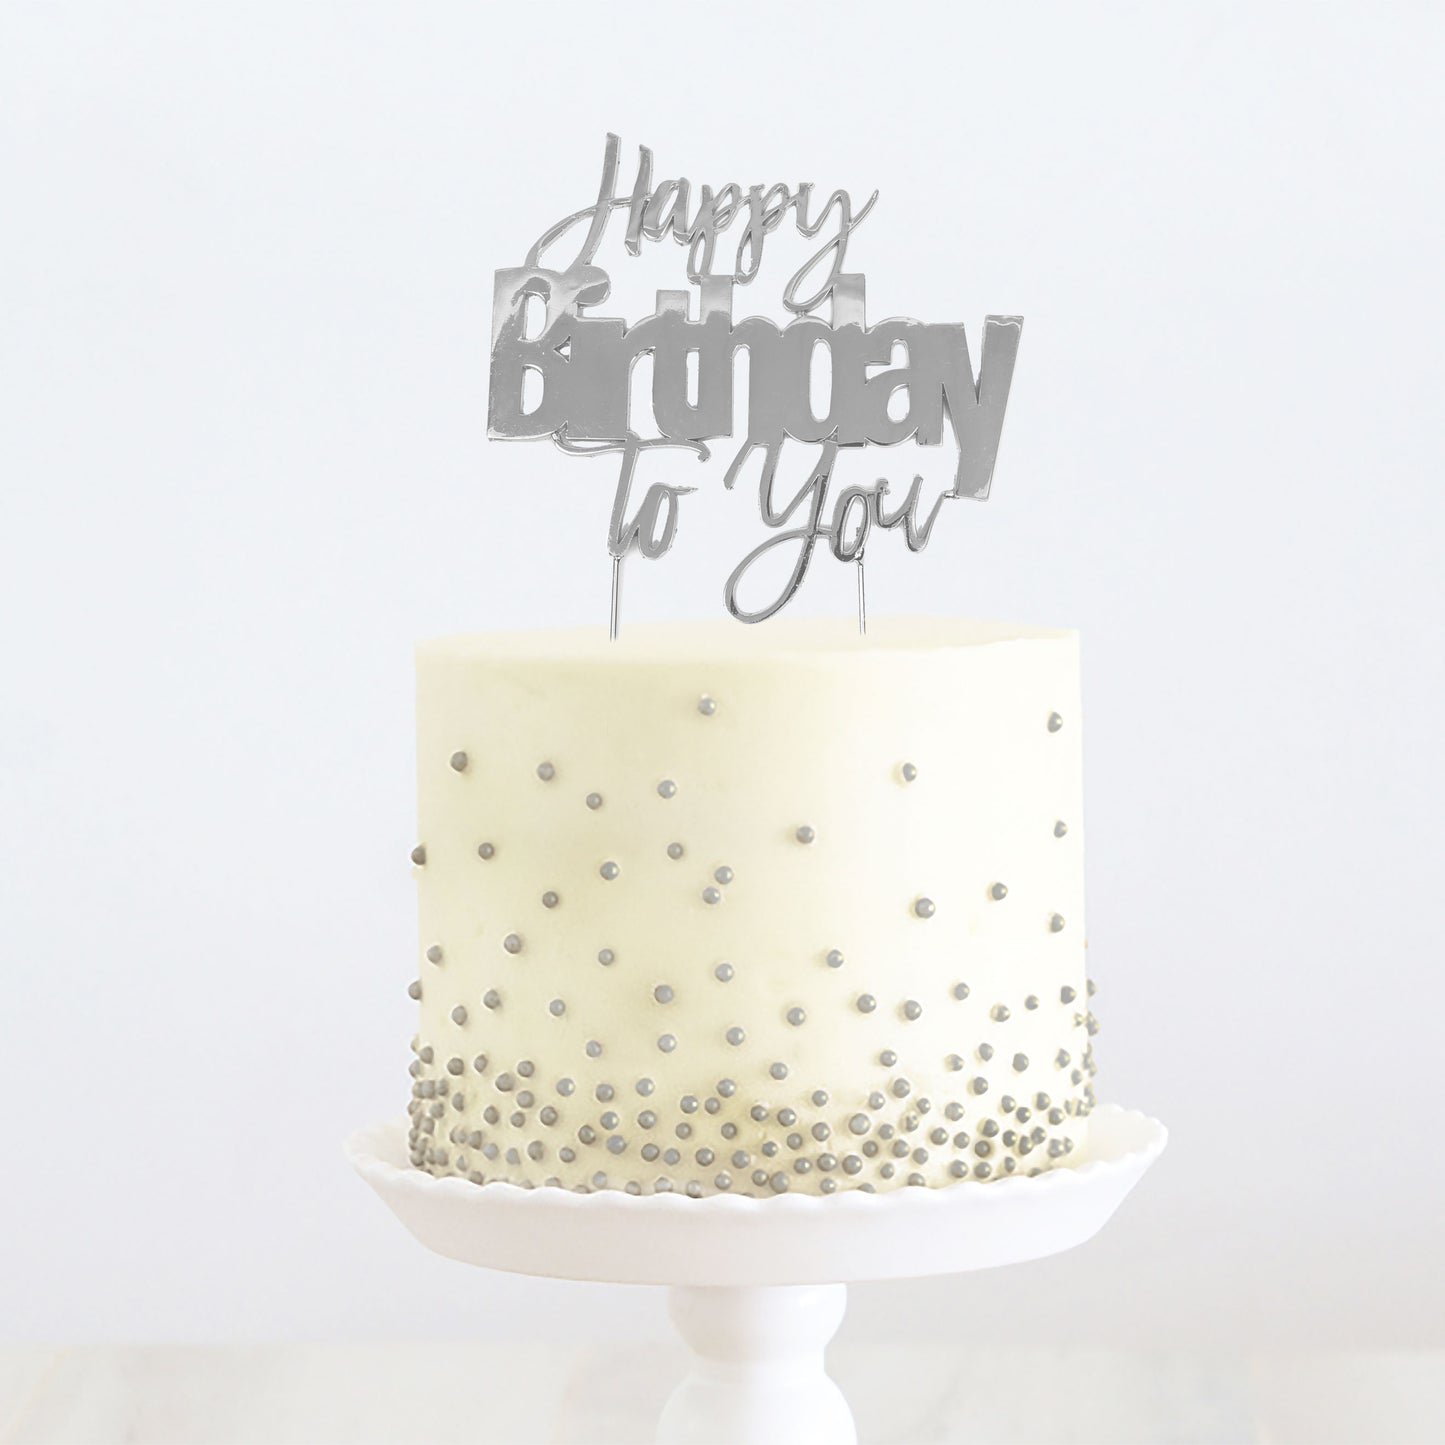 SILVER METAL CAKE TOPPER - HAPPY BIRTHDAY TO YOU